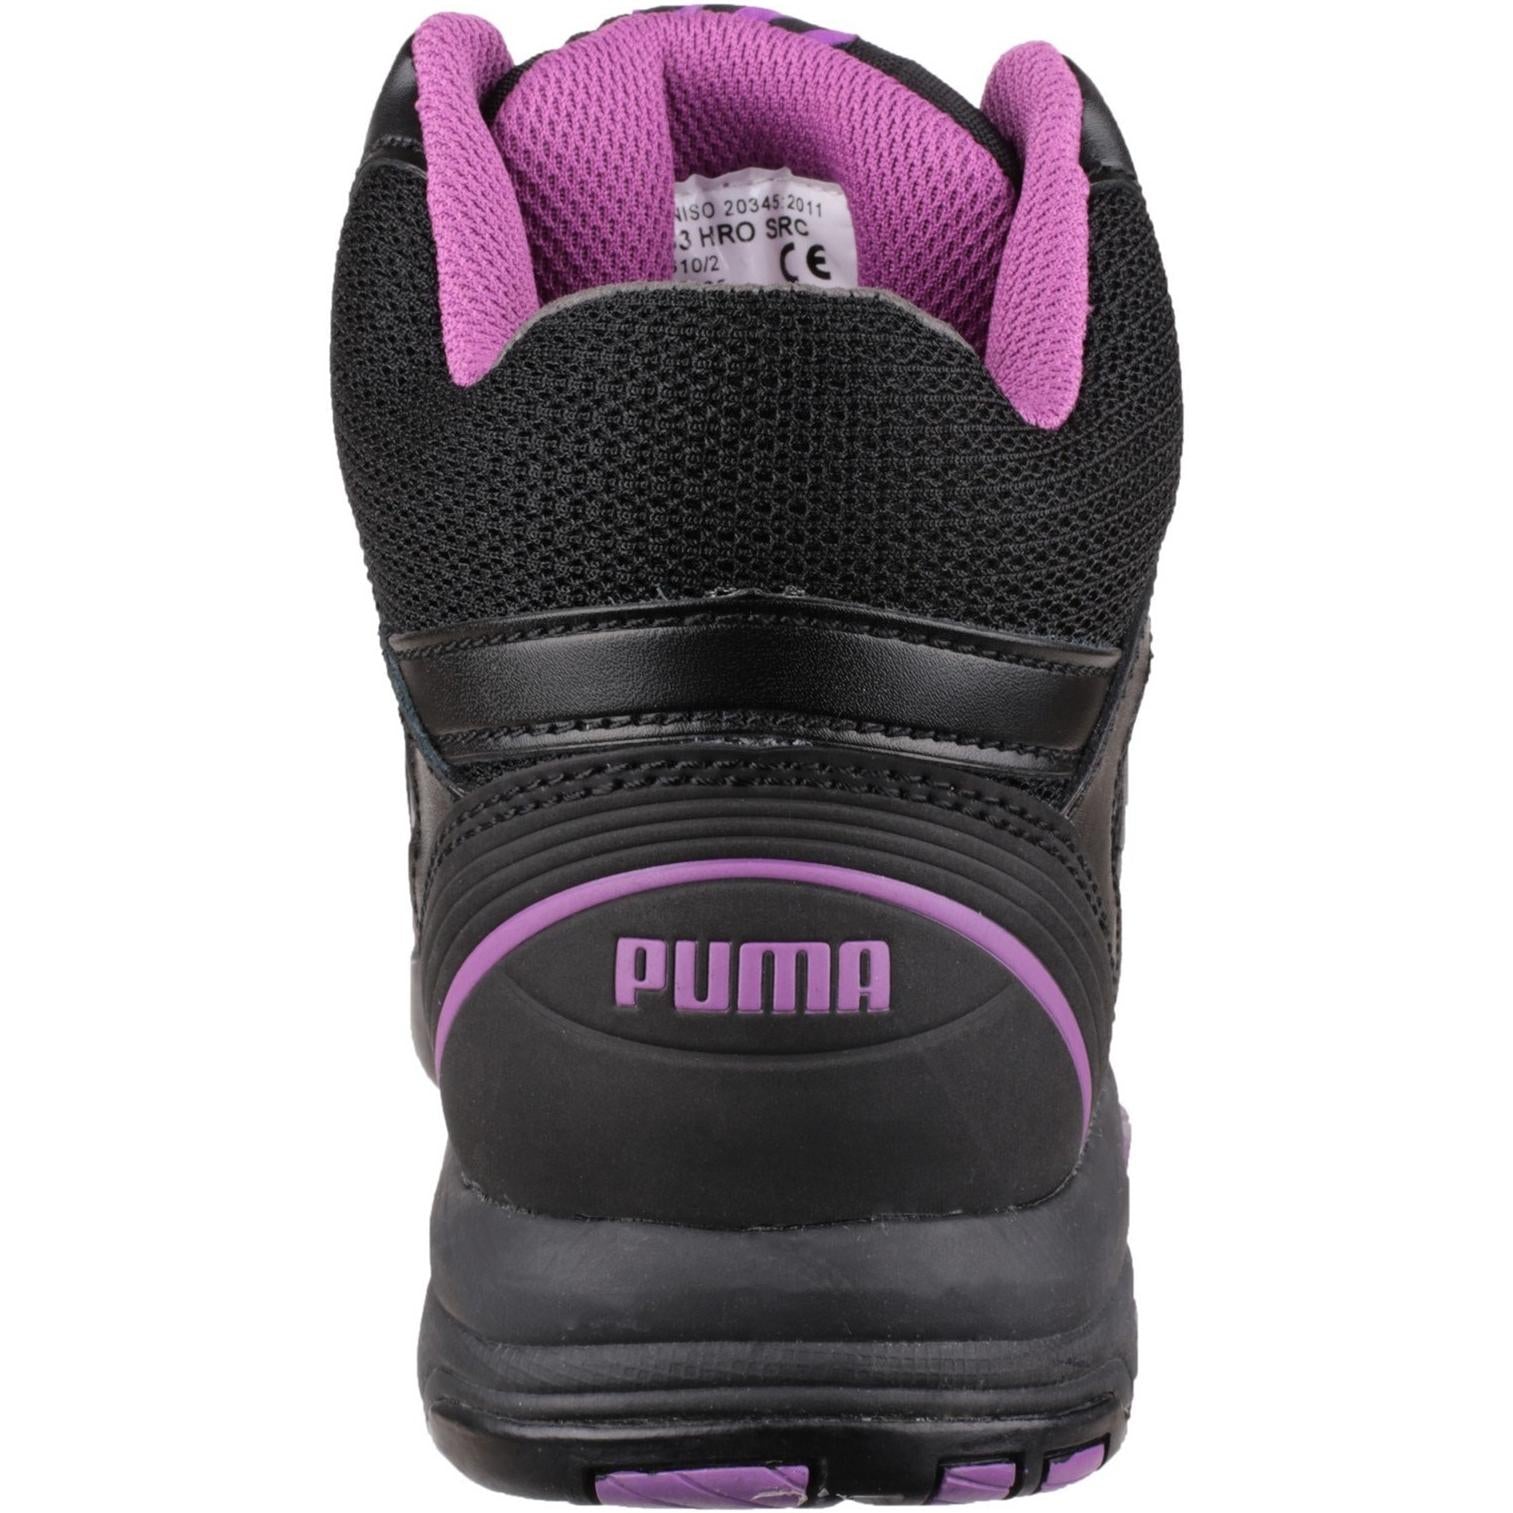 Puma Stepper Mid Safety Boot